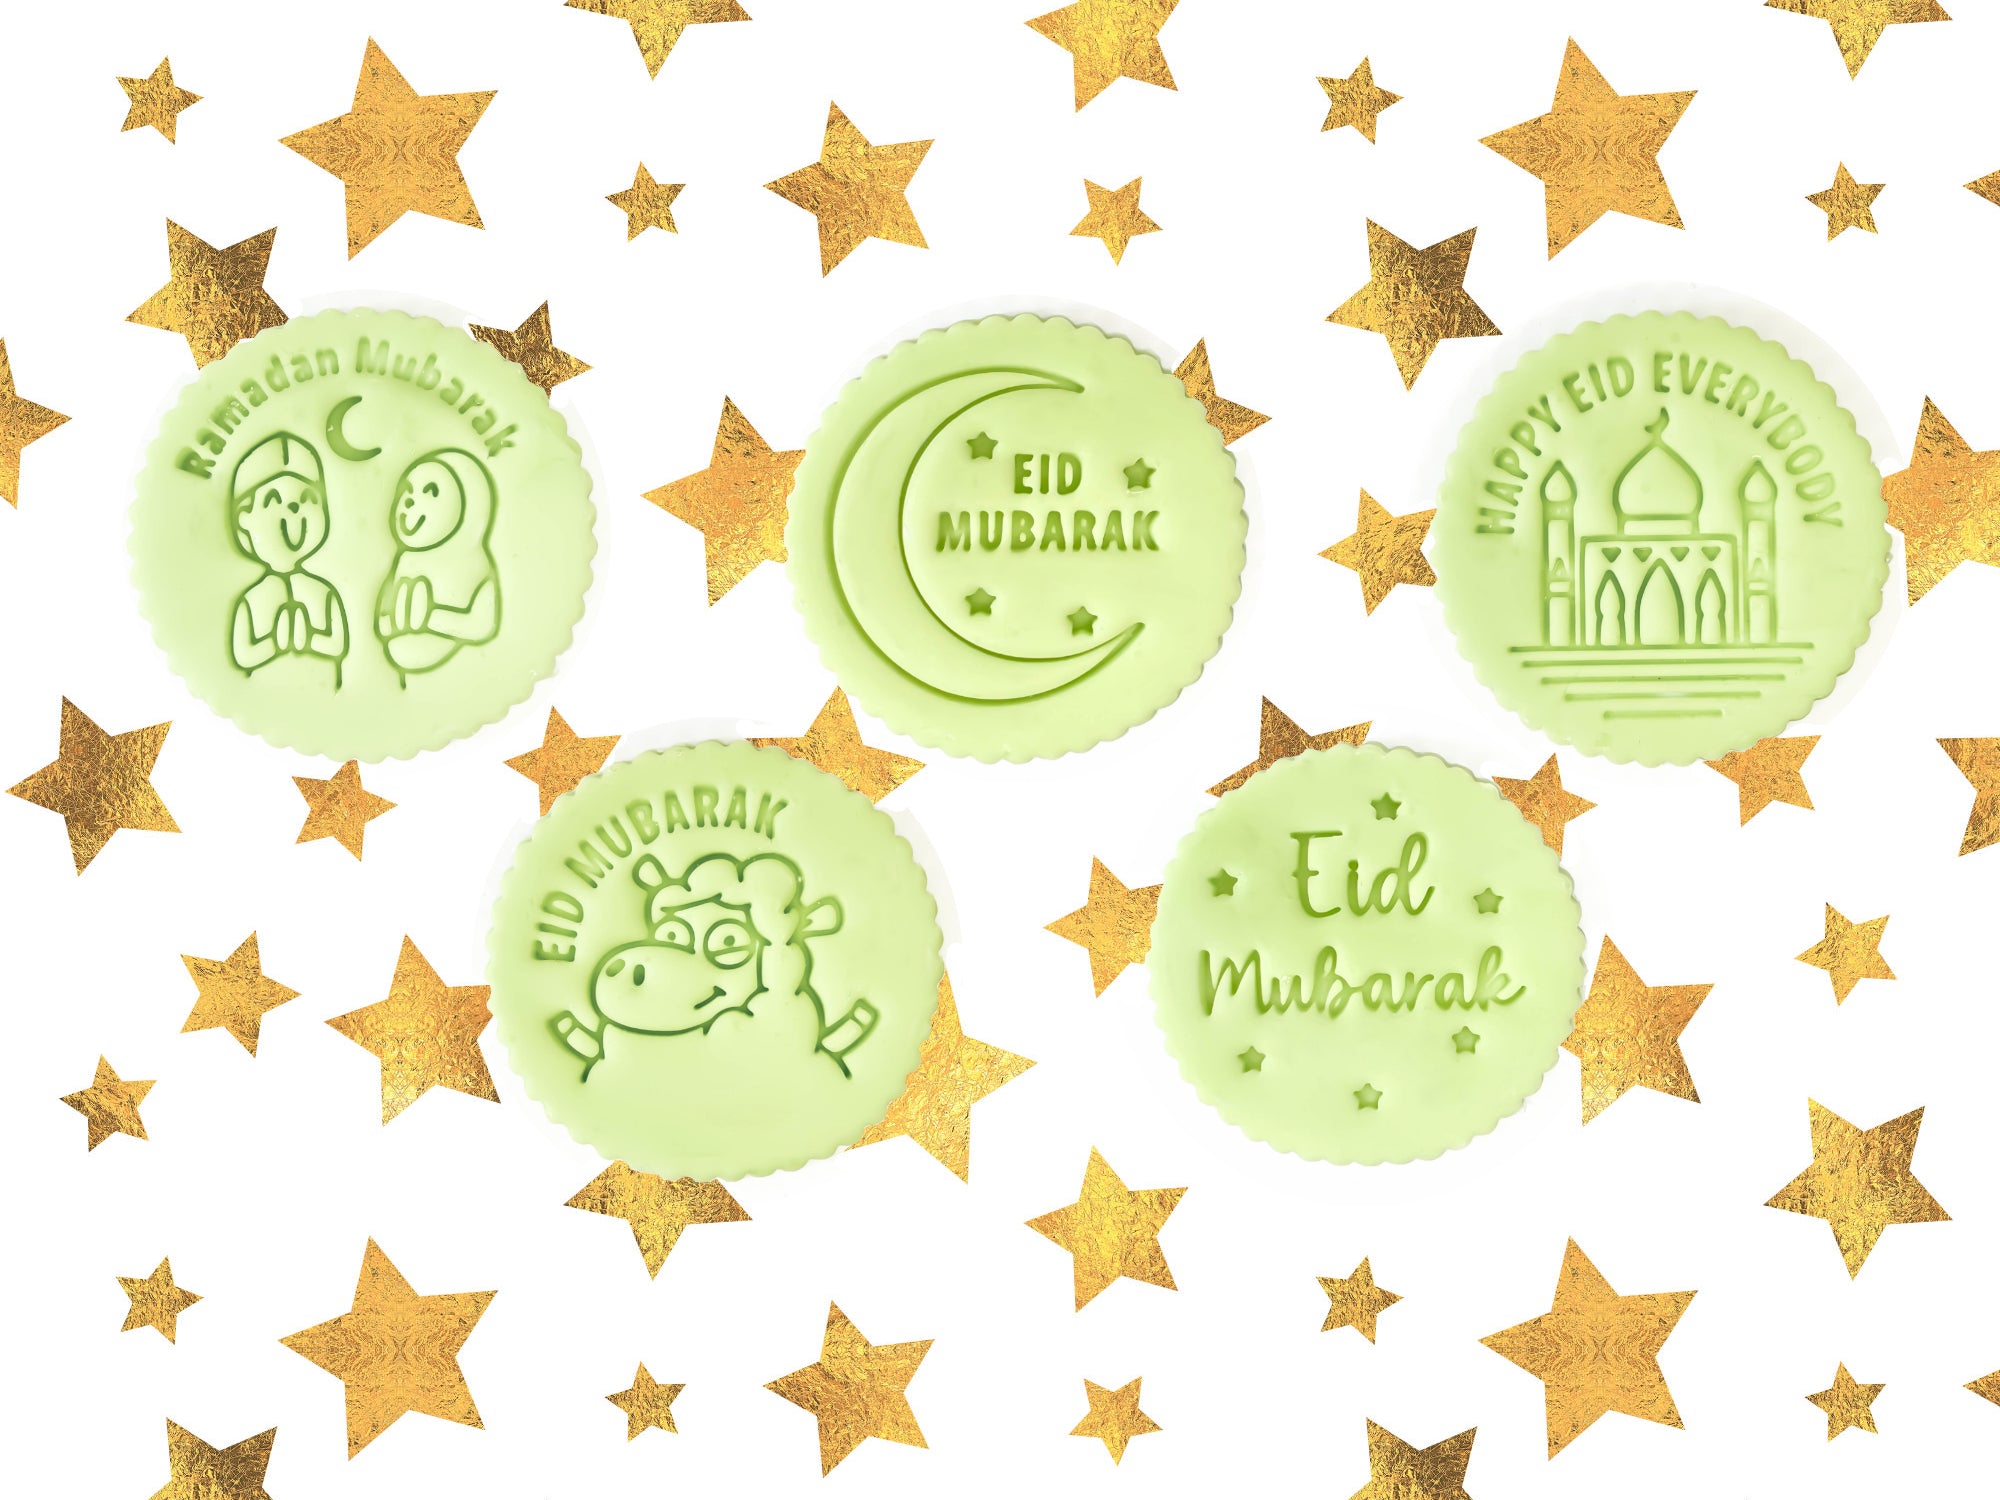 Eid and Ramadan Cupcake Toppers with gold stars